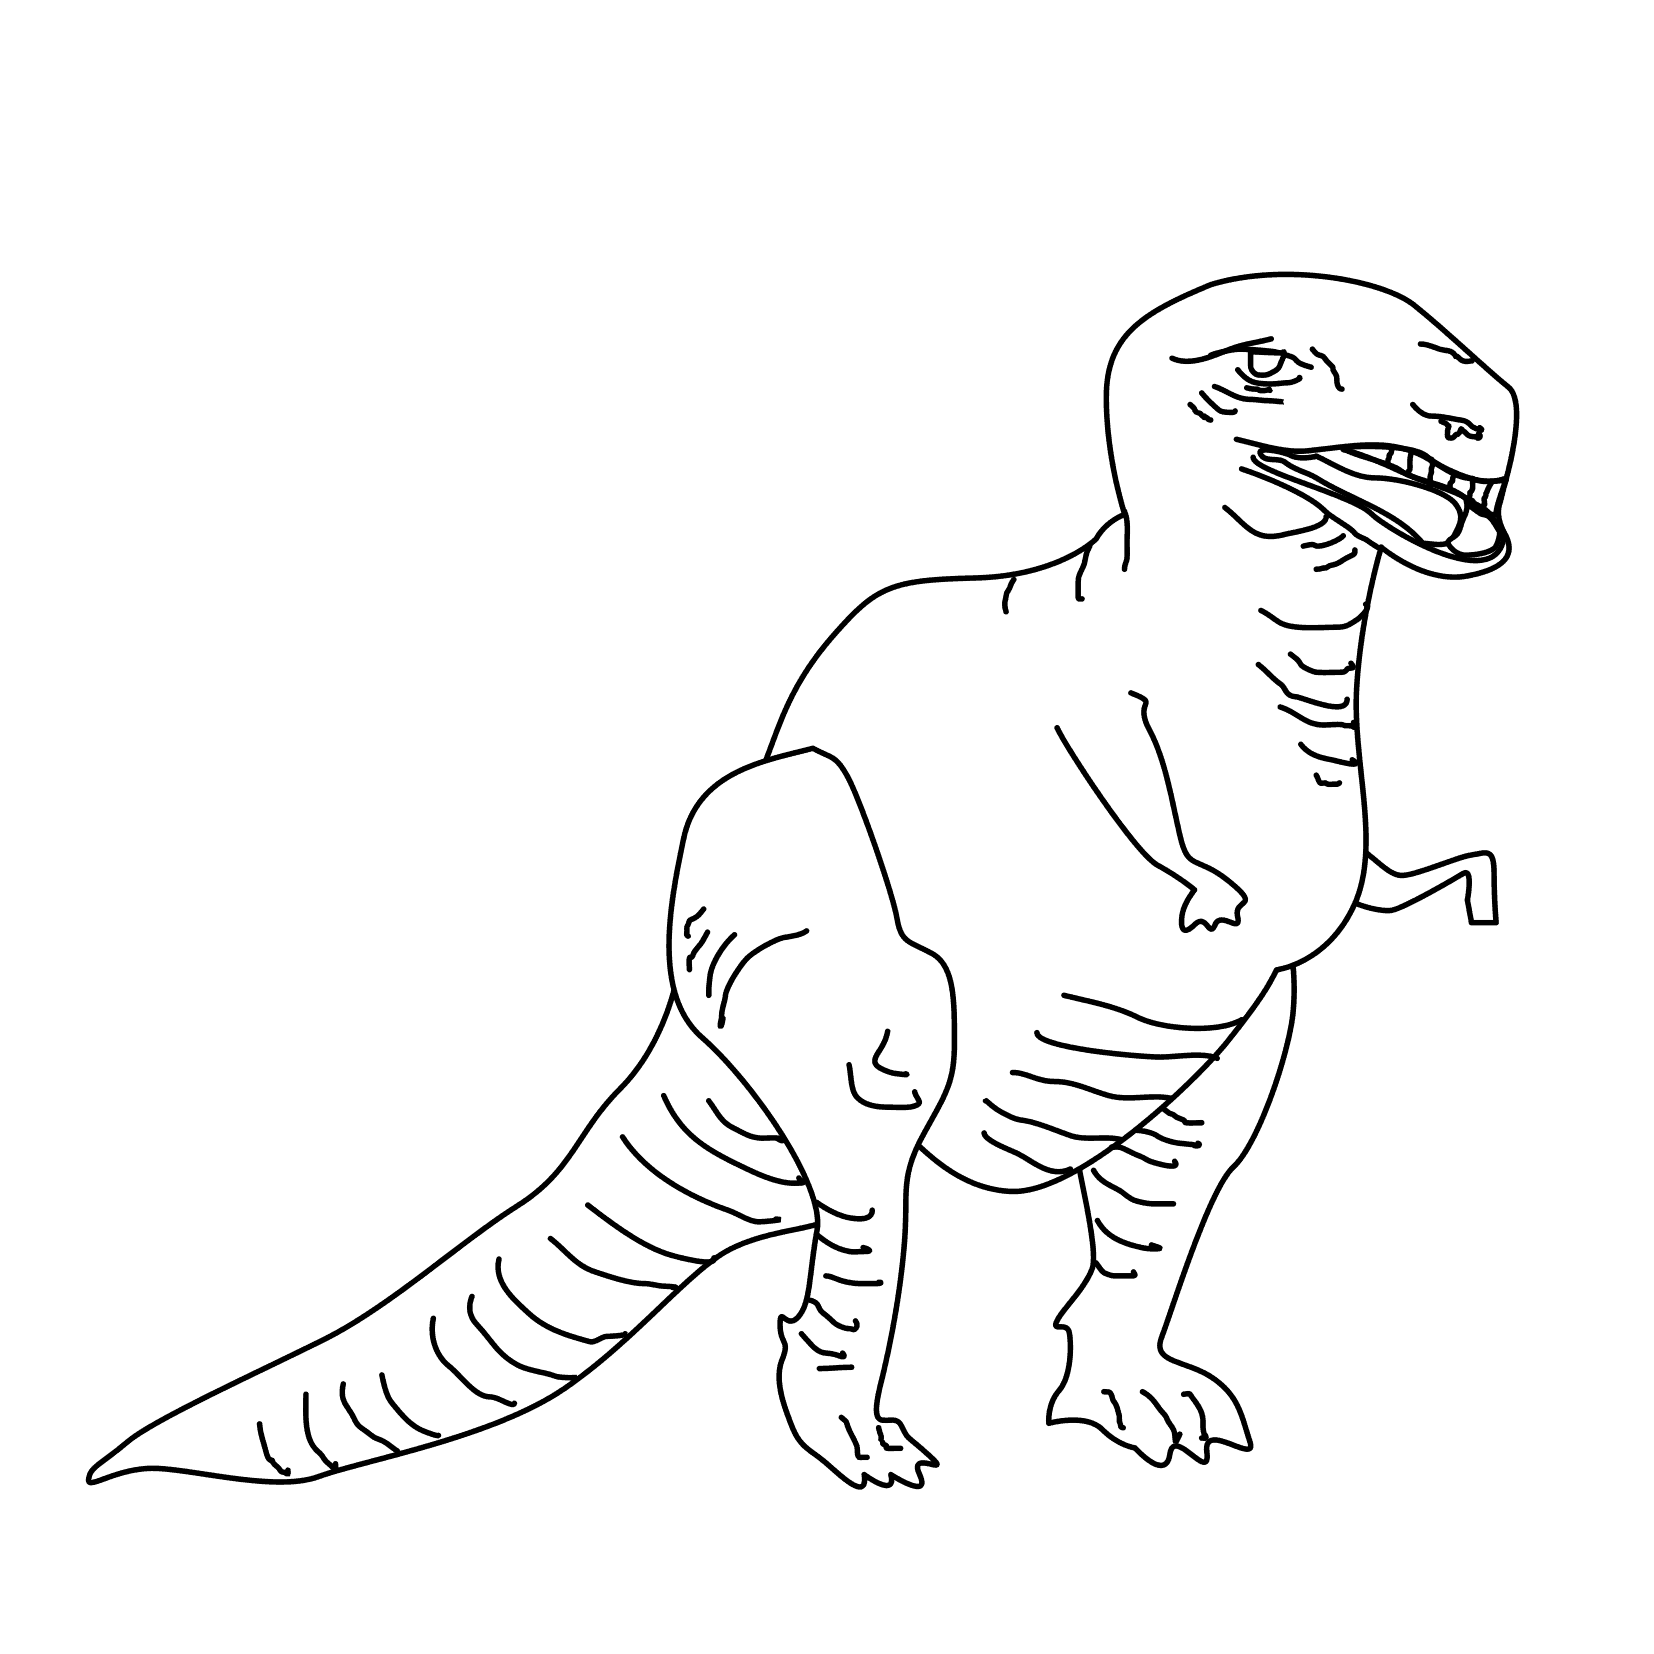 871 Simple Free Dinosaur Coloring Pages For Toddlers with Animal character